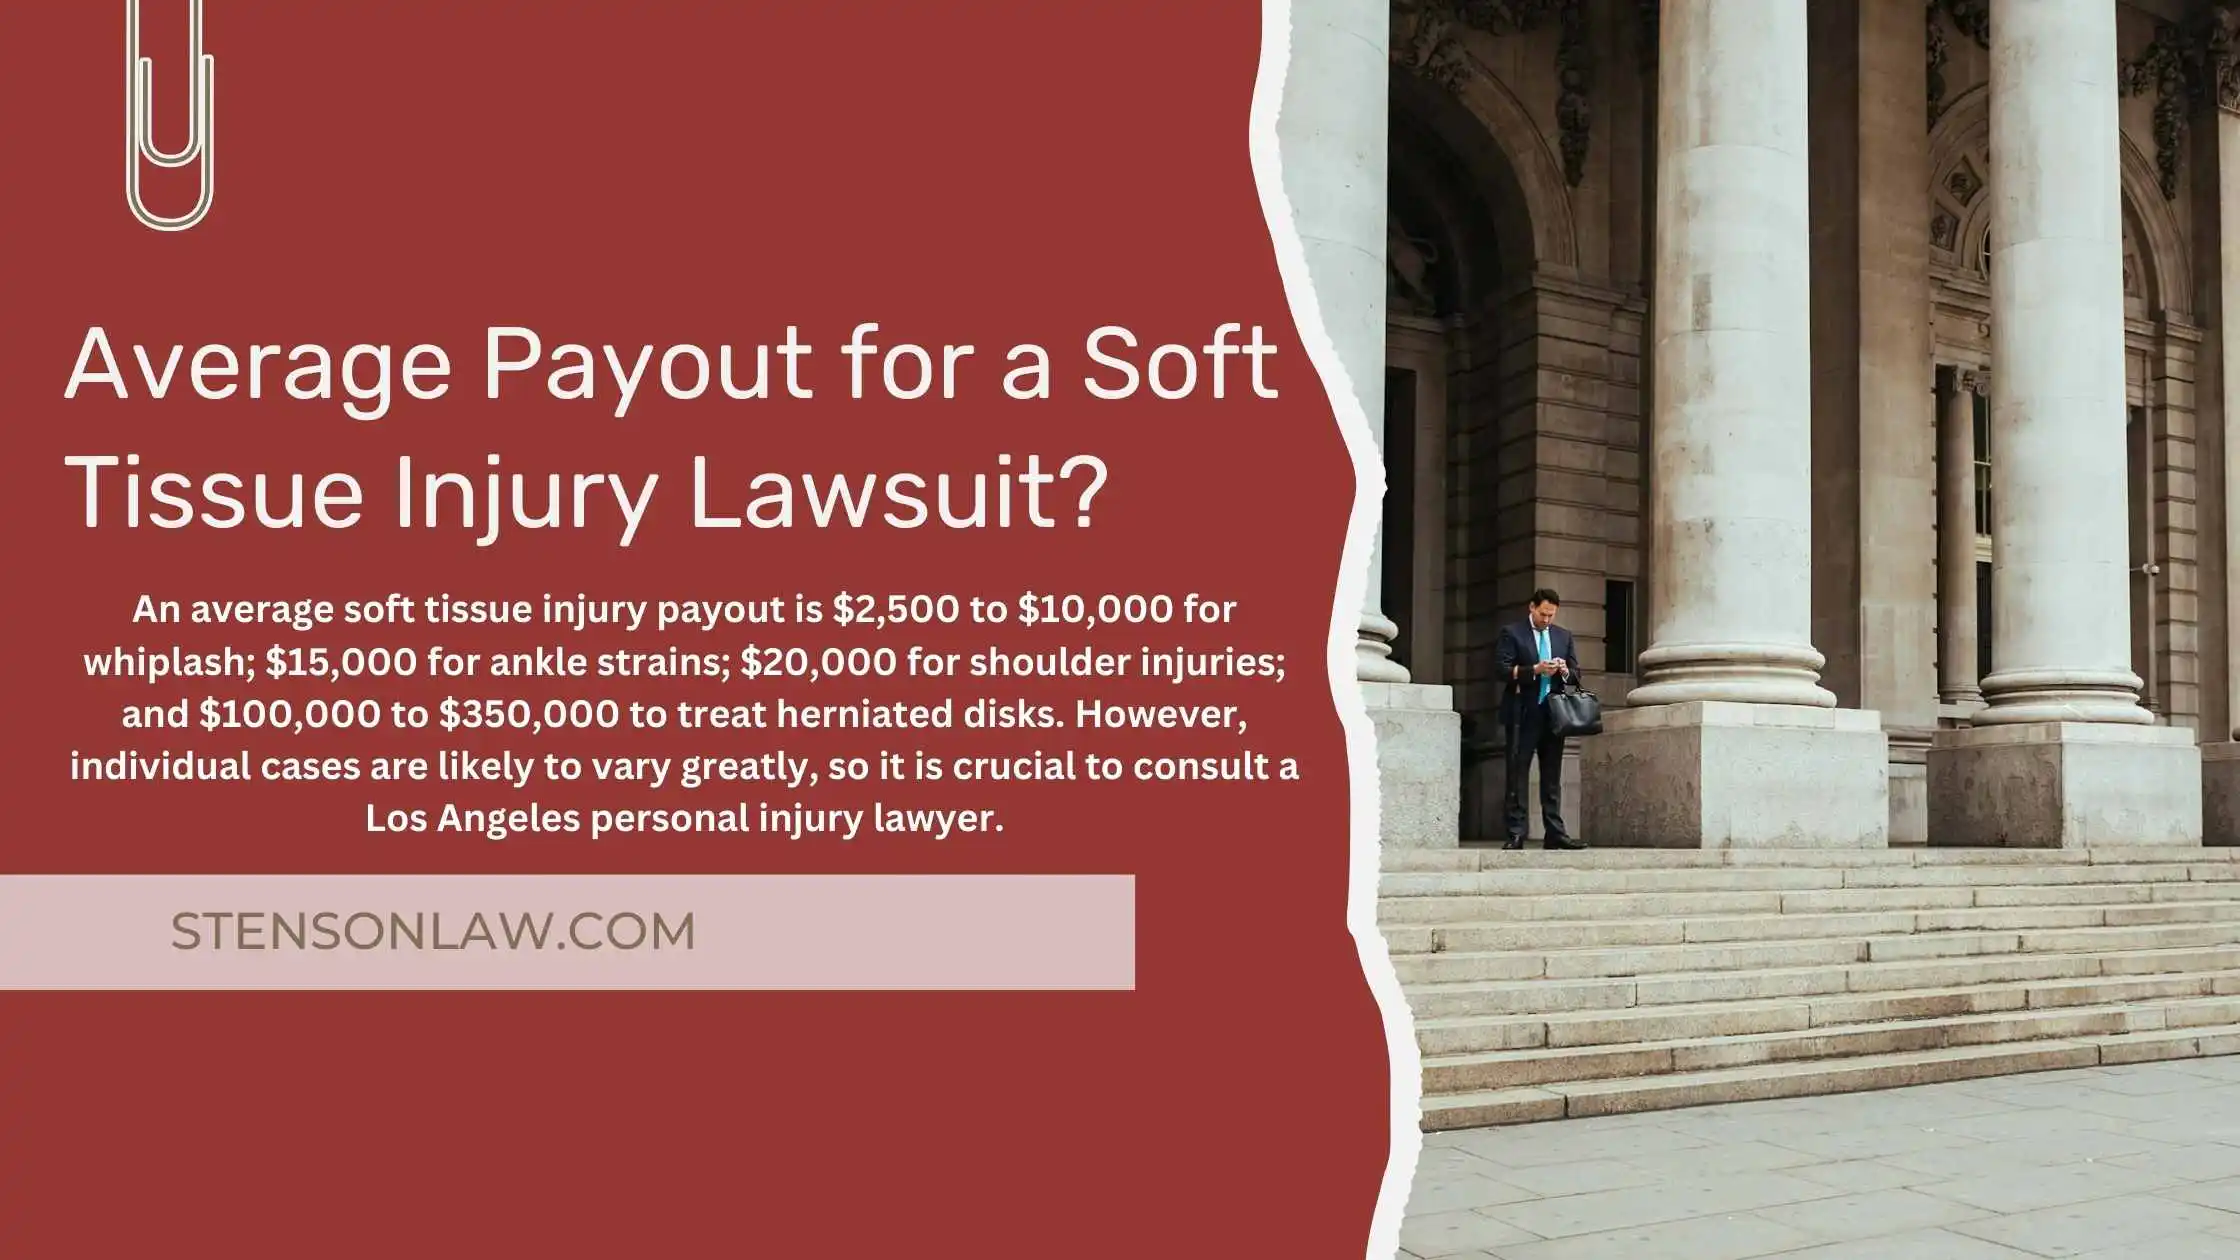 What is the Average Payout for a Soft Tissue Injury Lawsuit